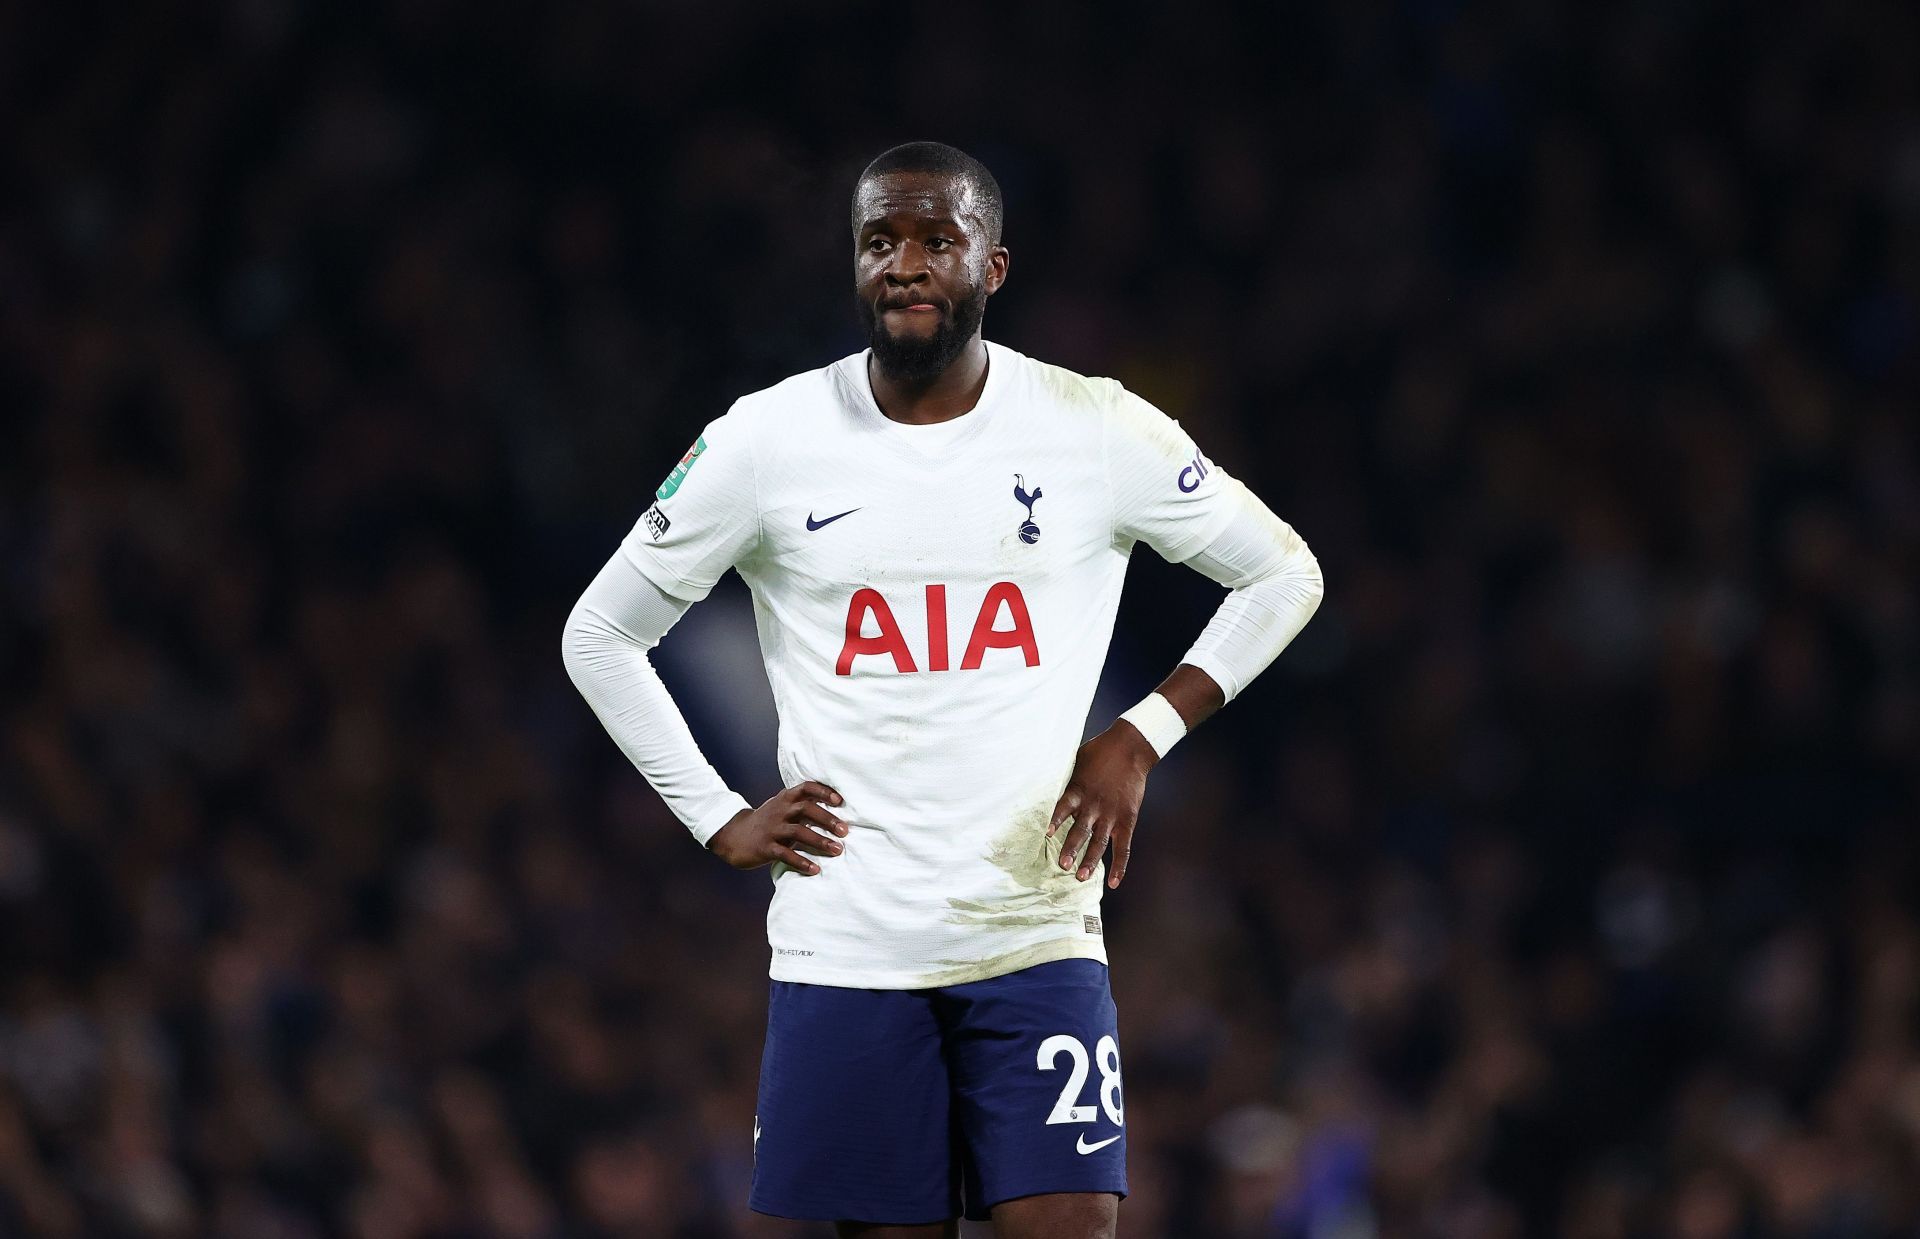 The Parisians are locked in negotiations with Tottenham Hotspur for Ndombele.